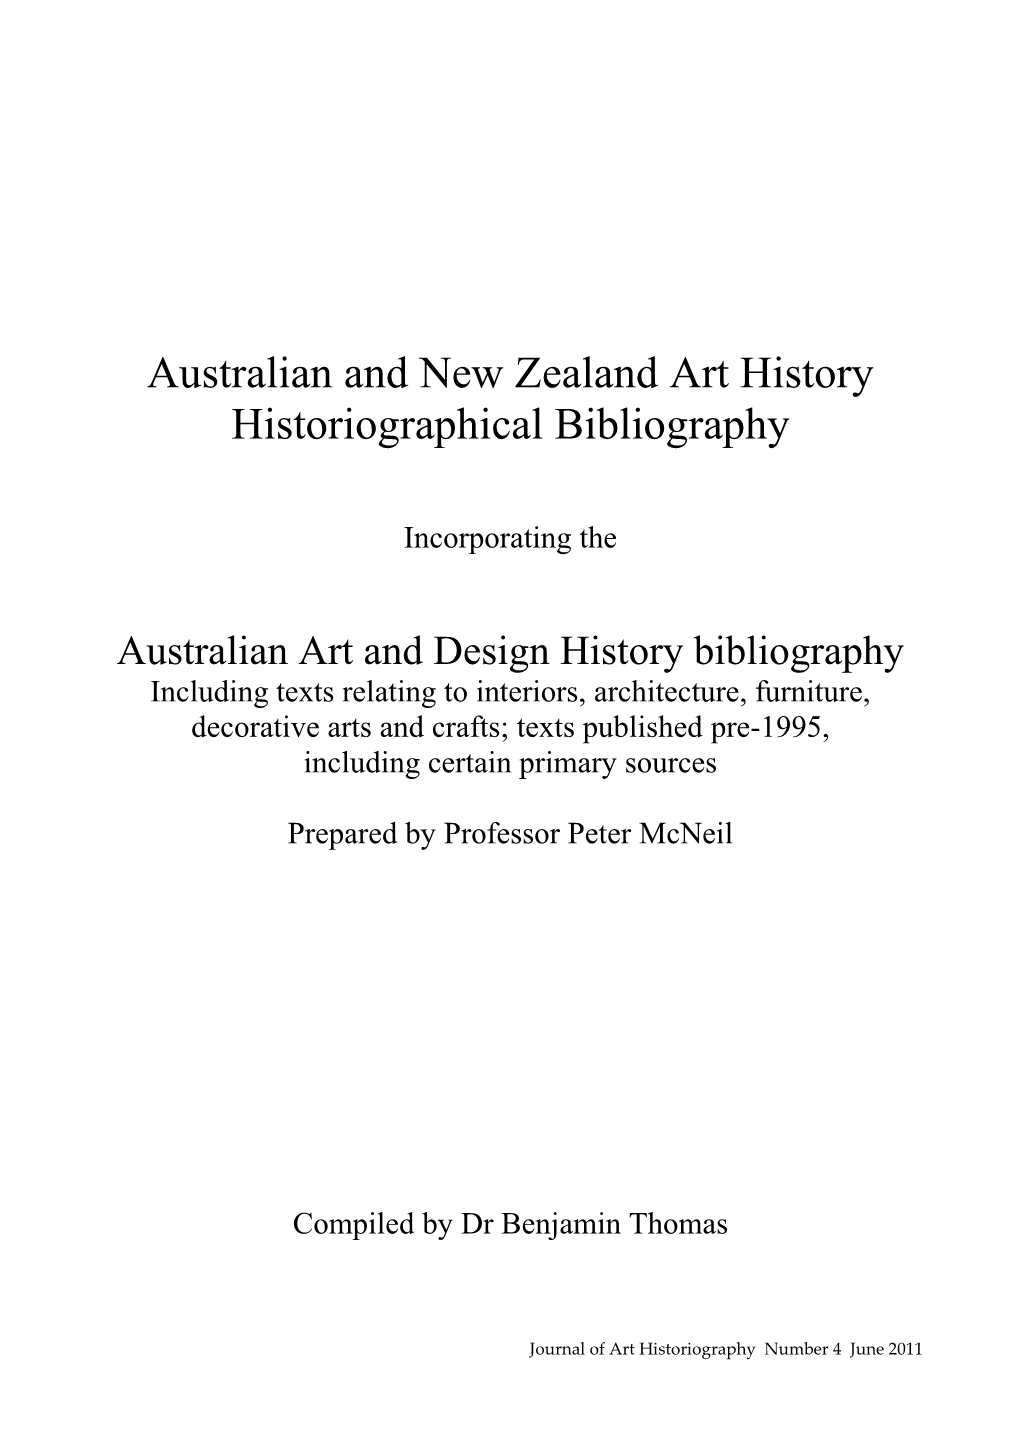 Australian and New Zealand Art History Historiographical Bibliography